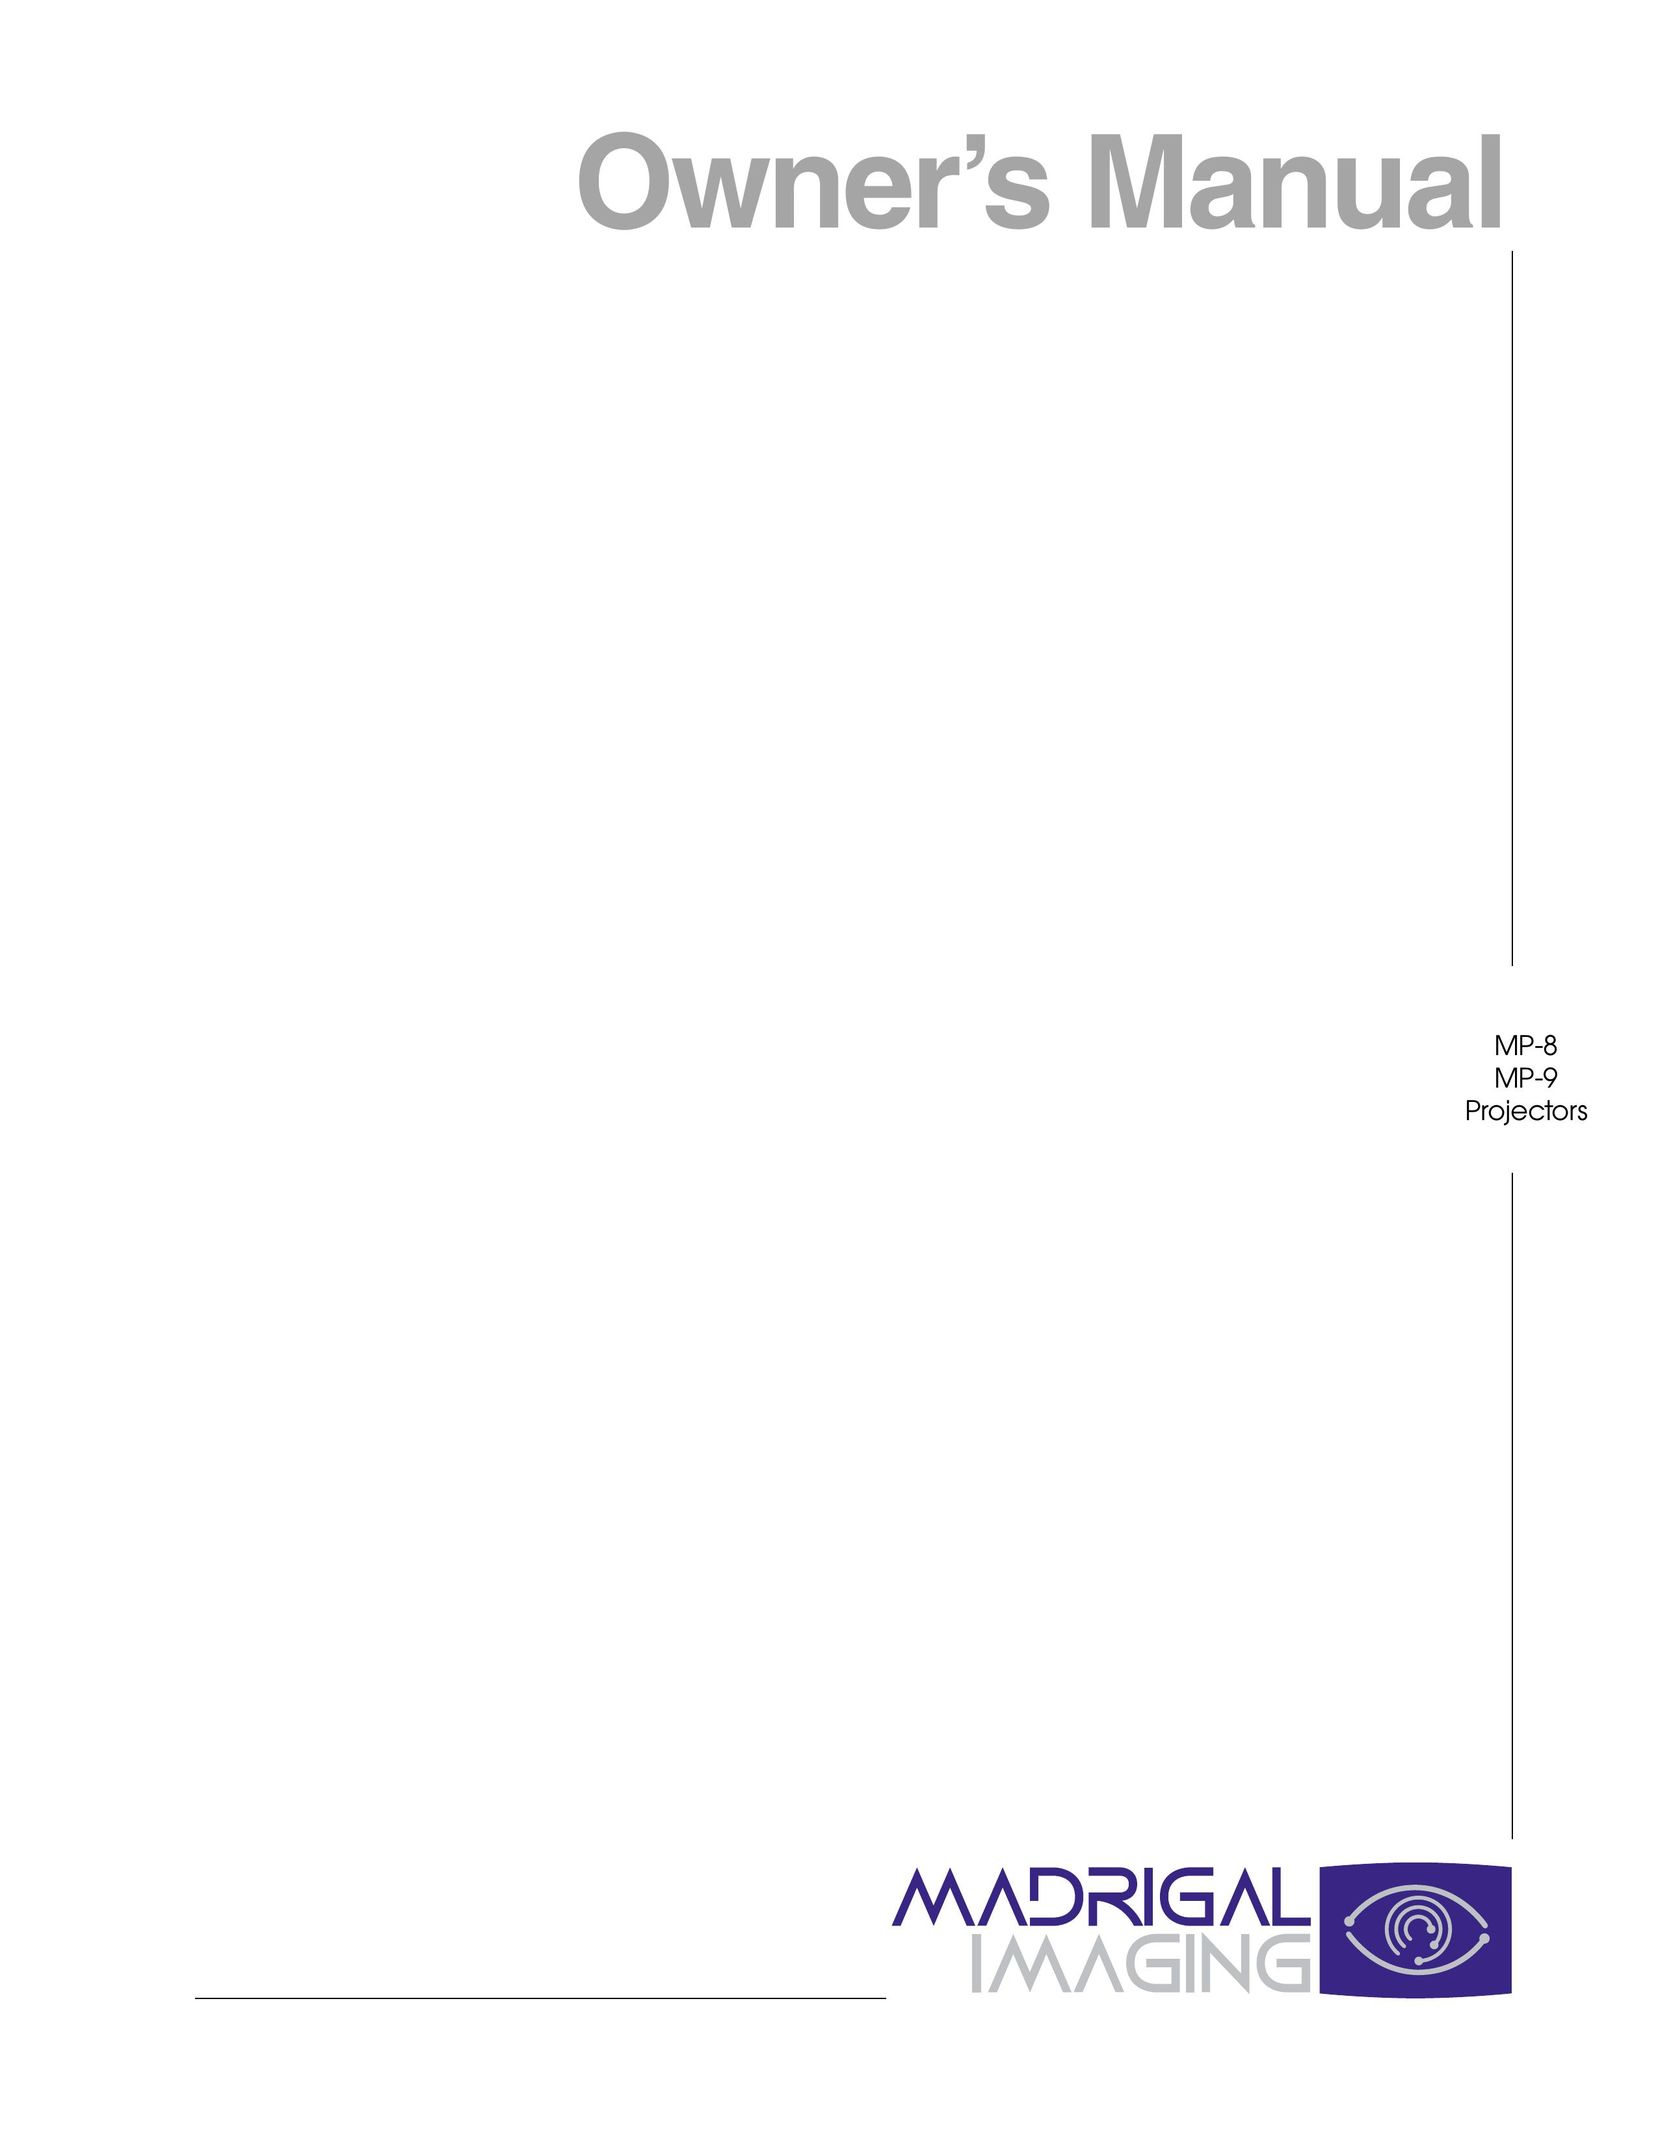 Madrigal Imaging MP-9 Projector User Manual